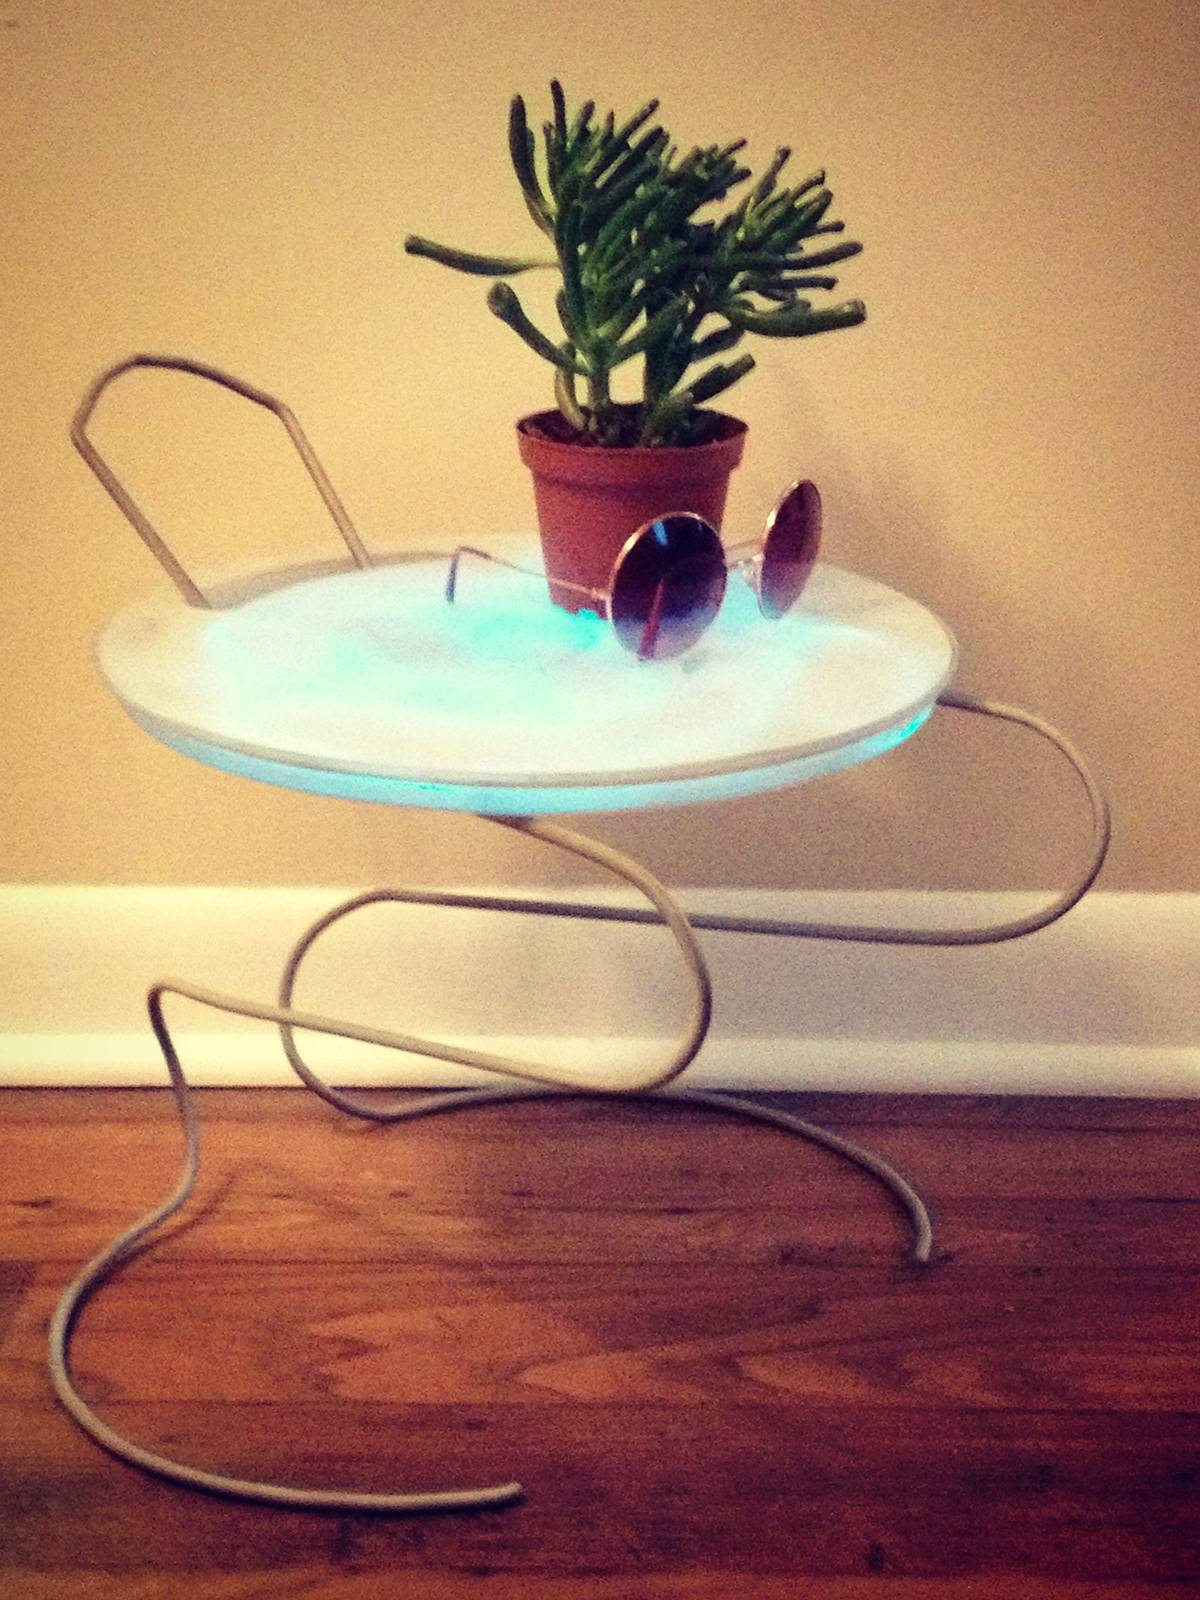 glow elo wire side table sound activated table SCAD manufacturing technologies student light up interactive